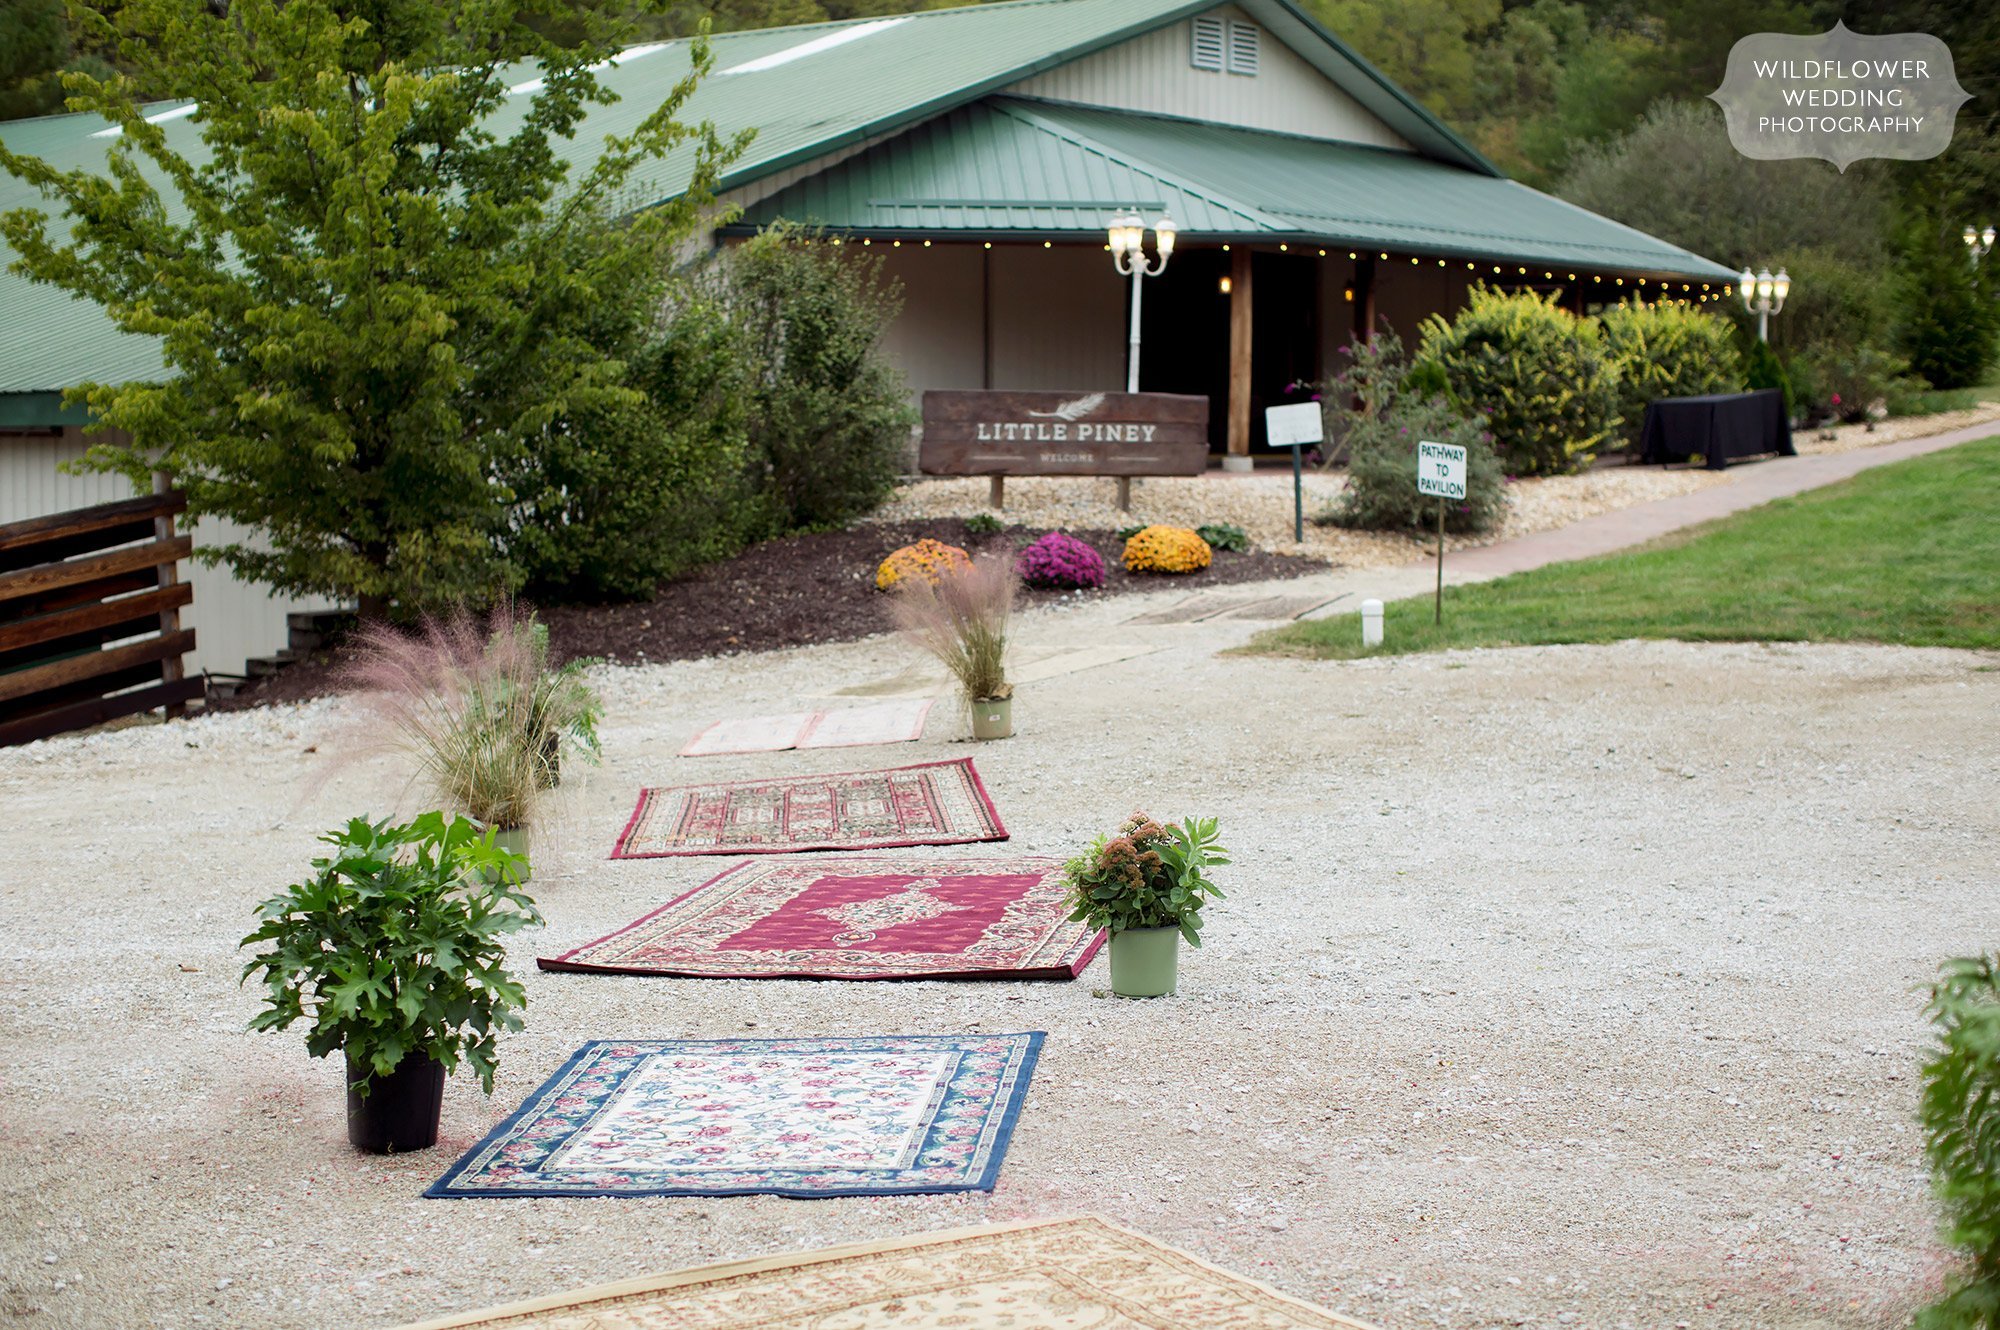 Boho wedding decor with persian rugs at Little Piney Lodge in Hermann, MO.